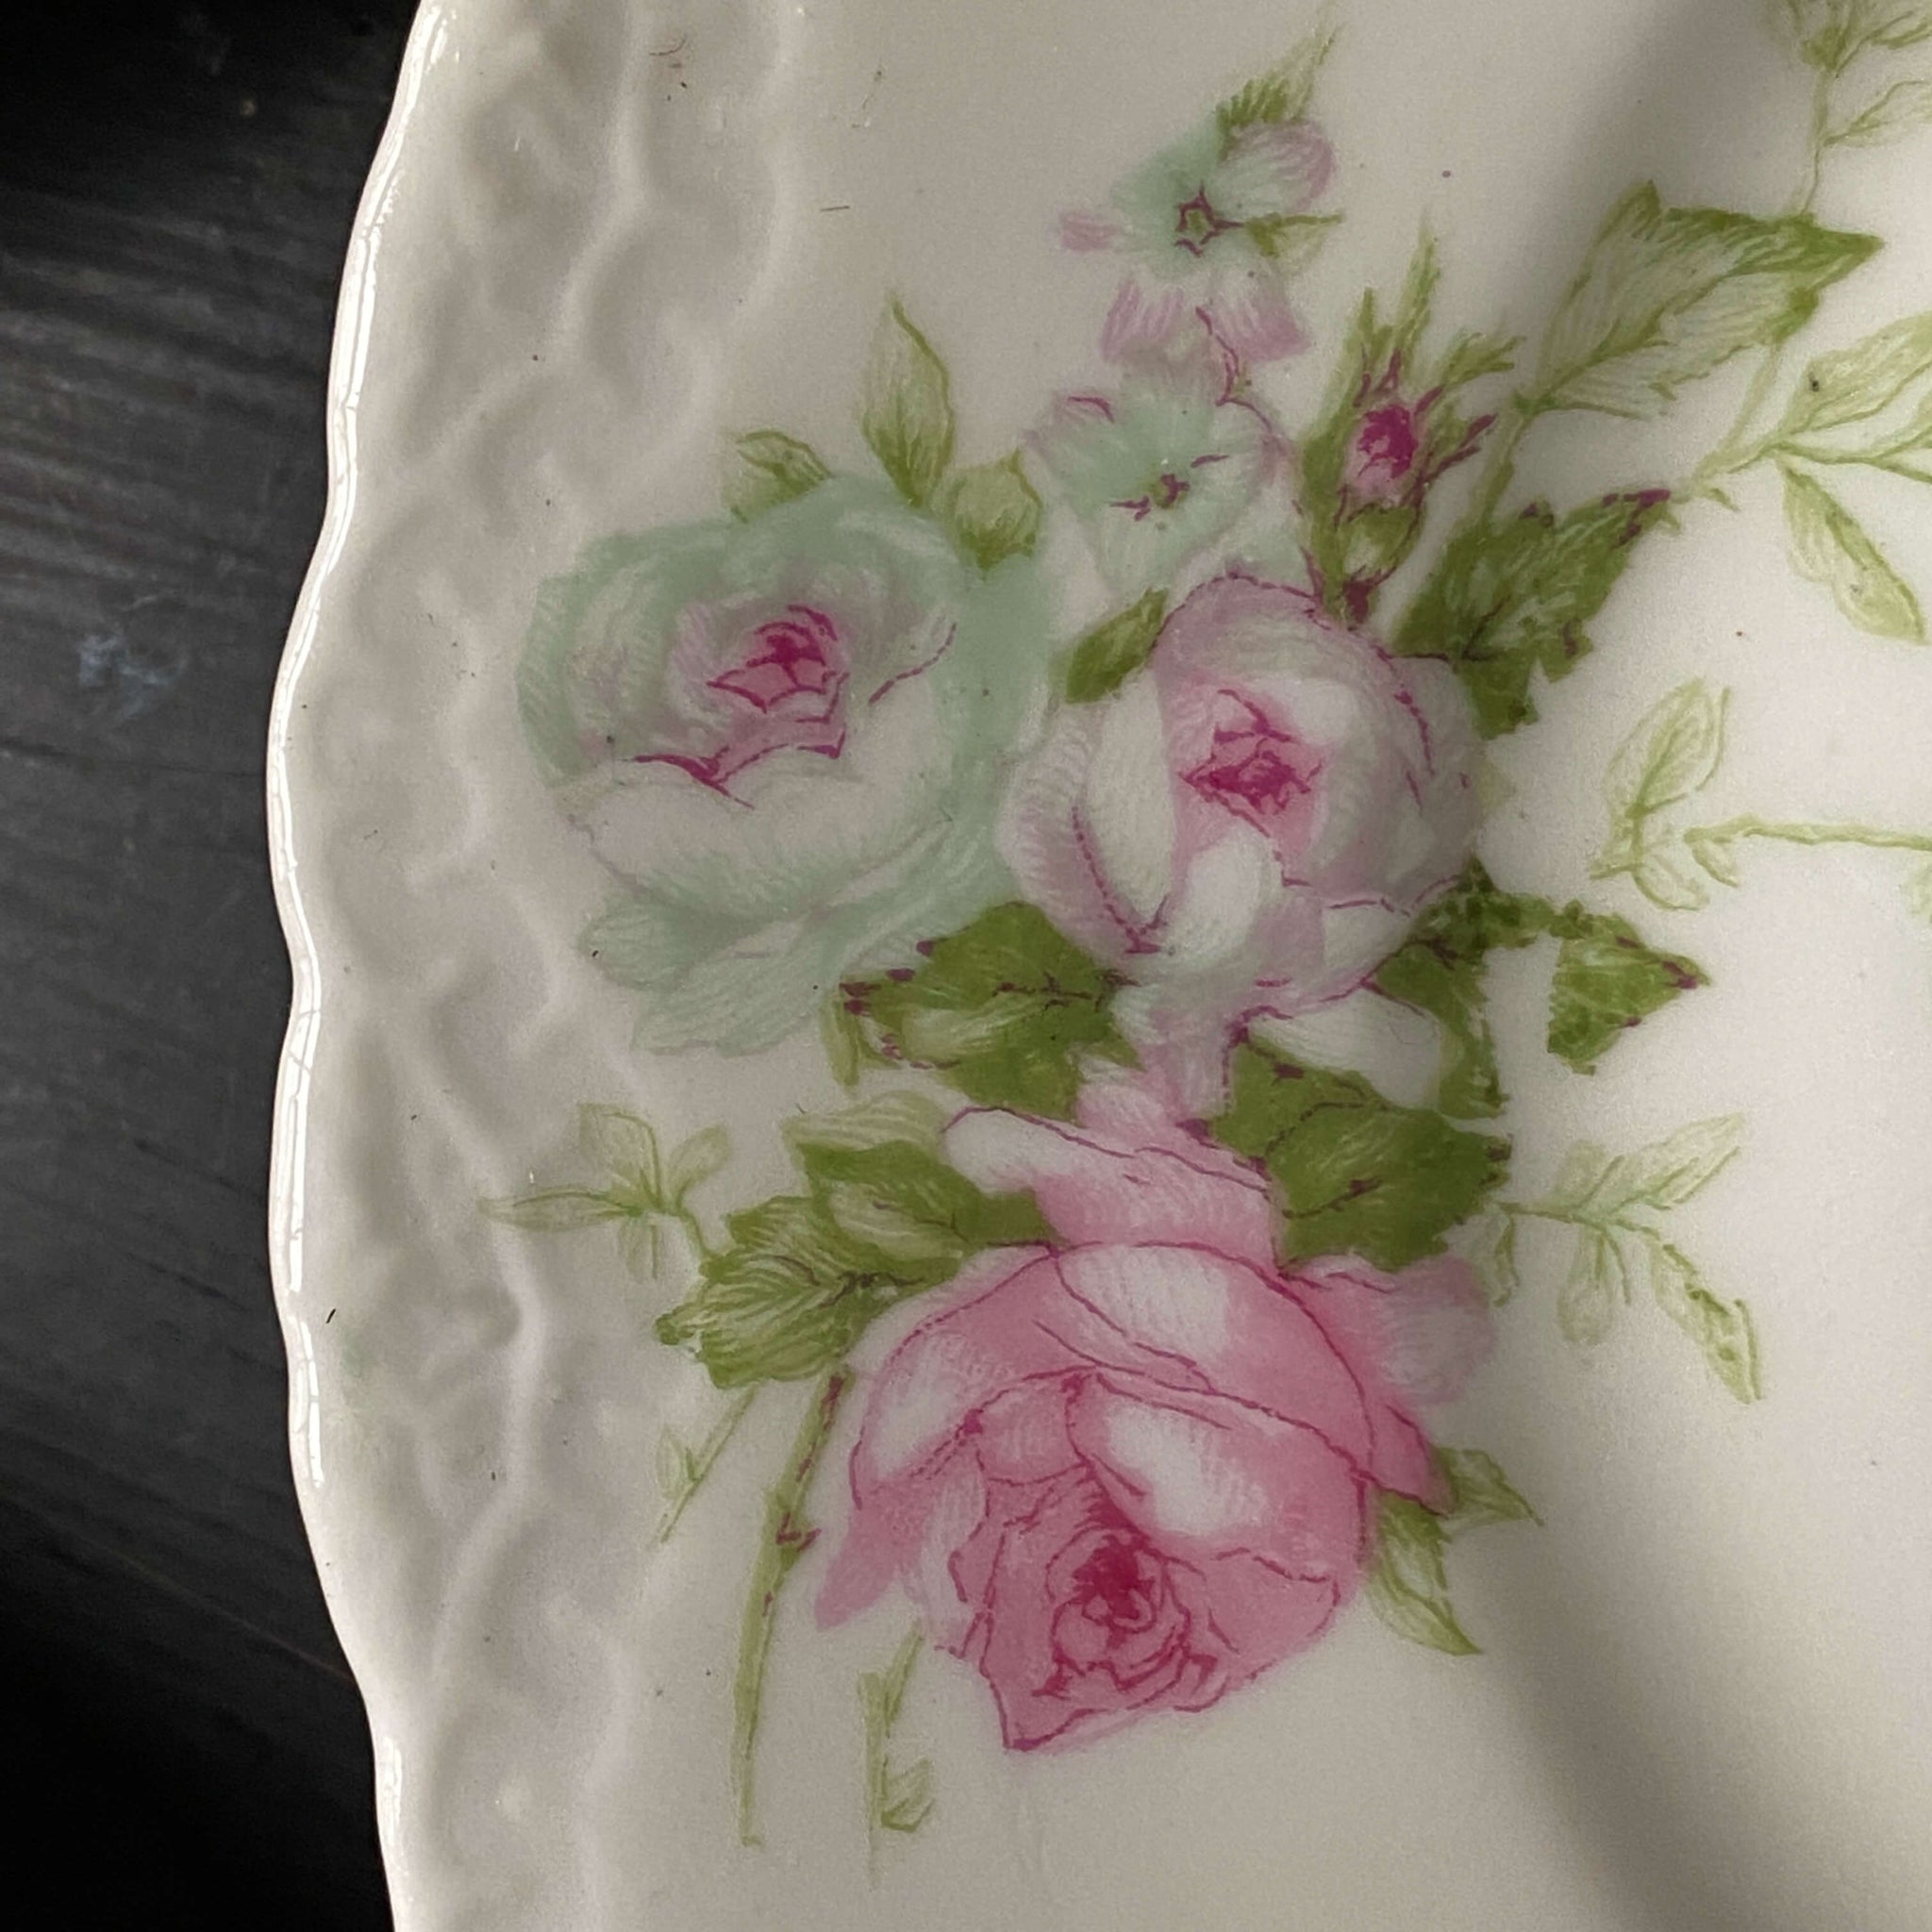 Antique Theodore Haviland Limoges Bread Plates circa 1903 - Set of Four Country French Cabbage Roses